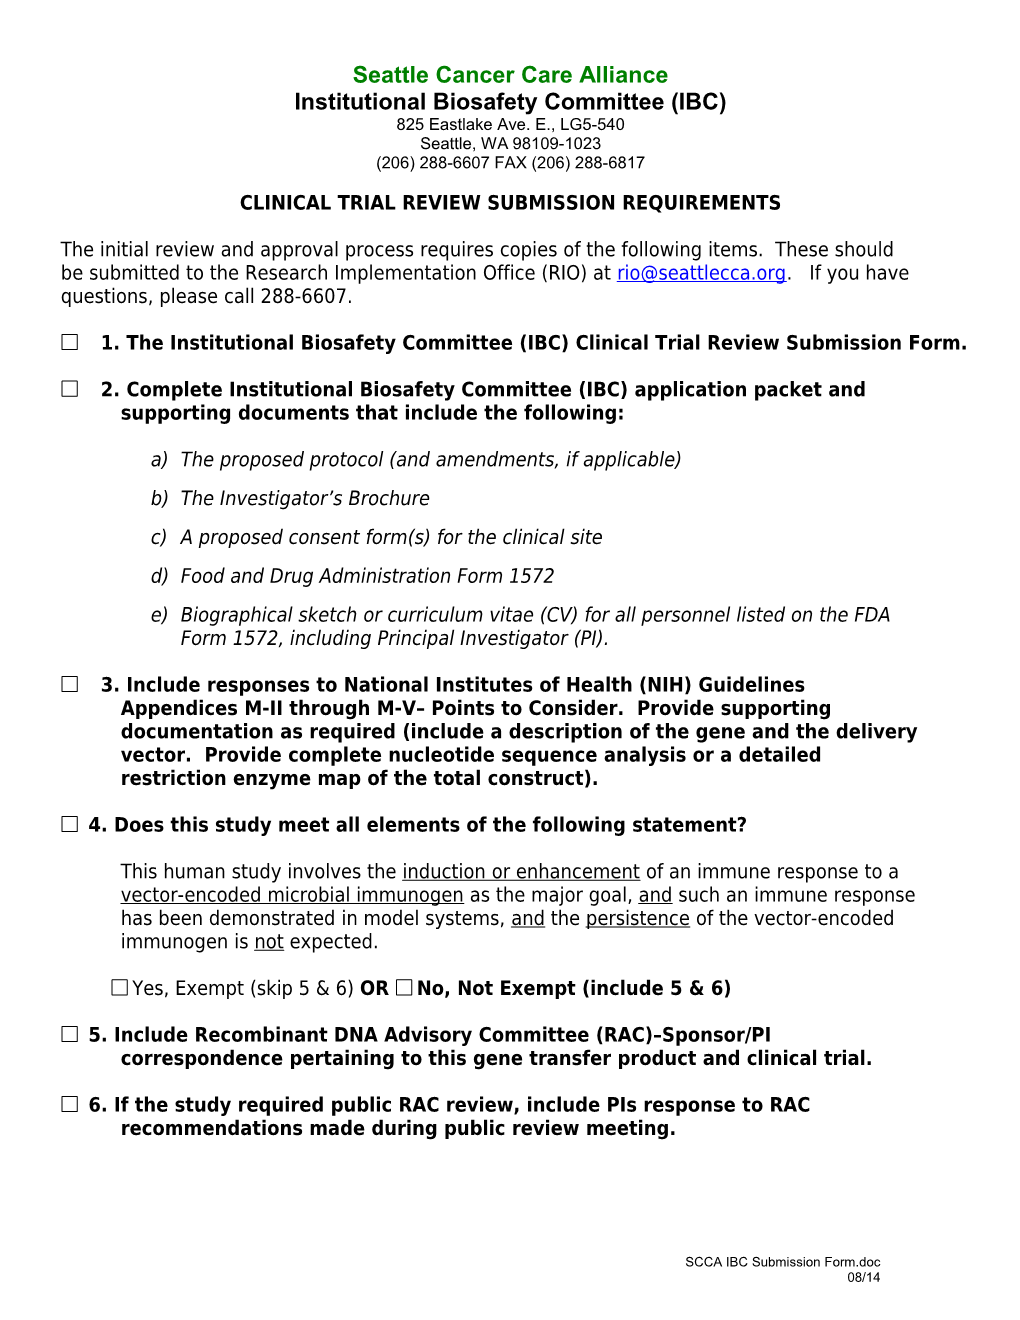 Clinical Trial Review Submission Requirements